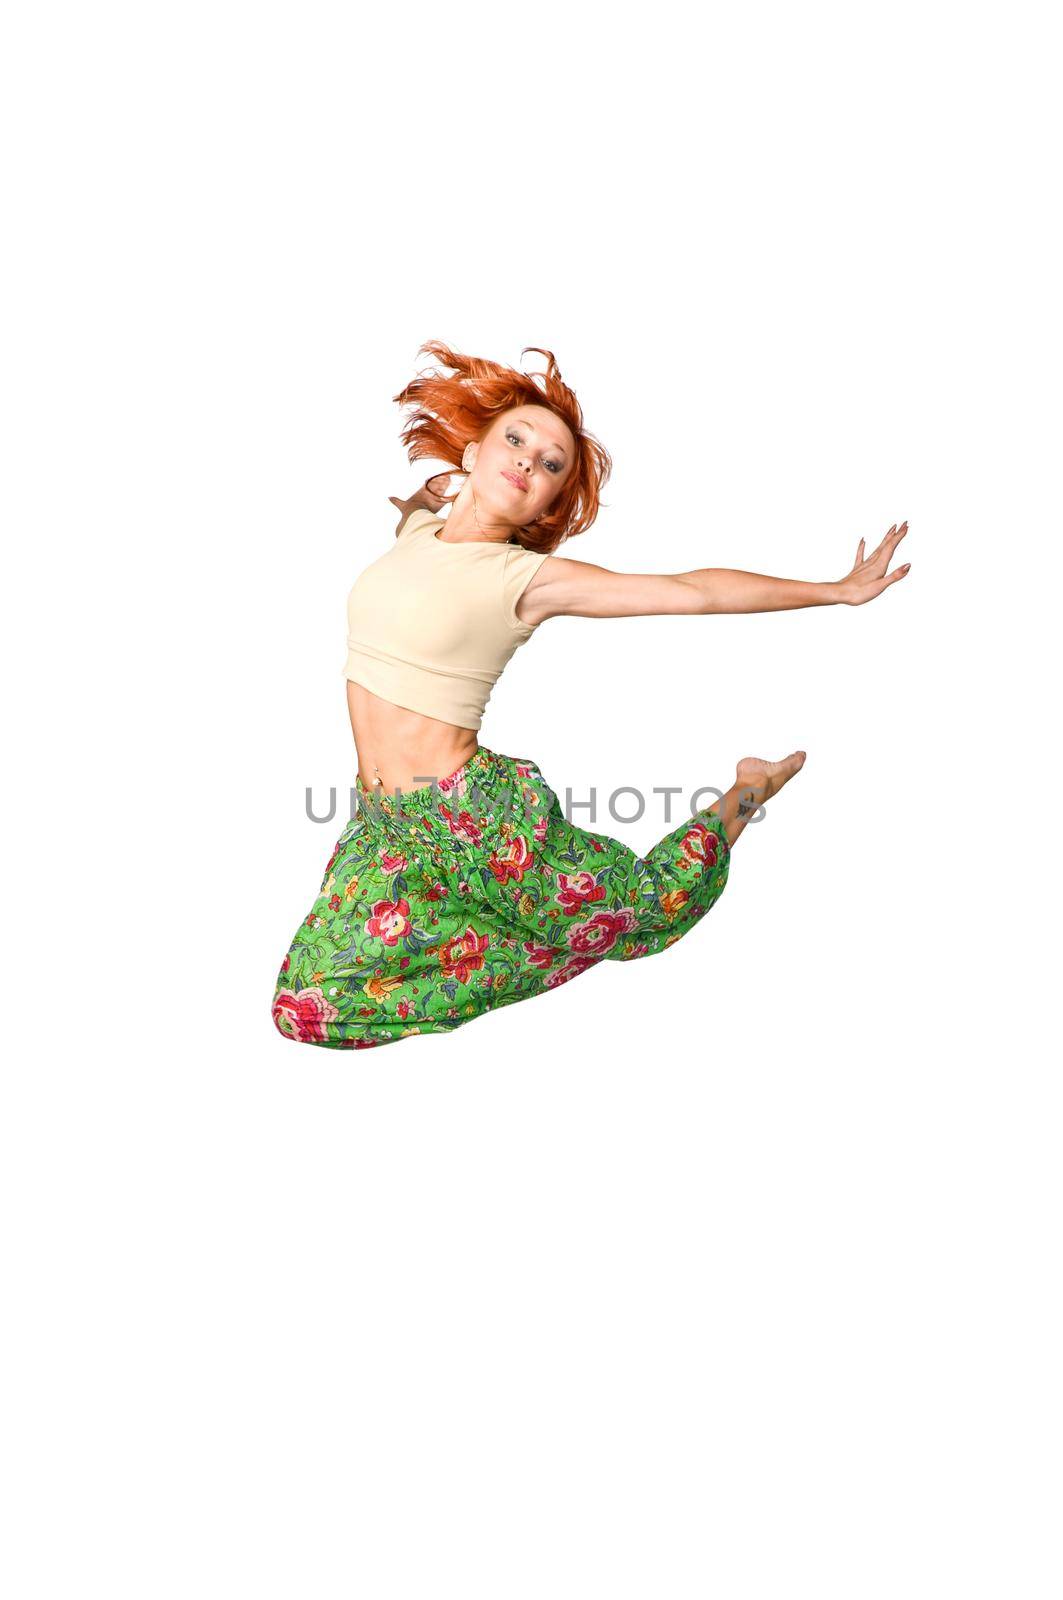 Beautiful girl jumping high isolated on white